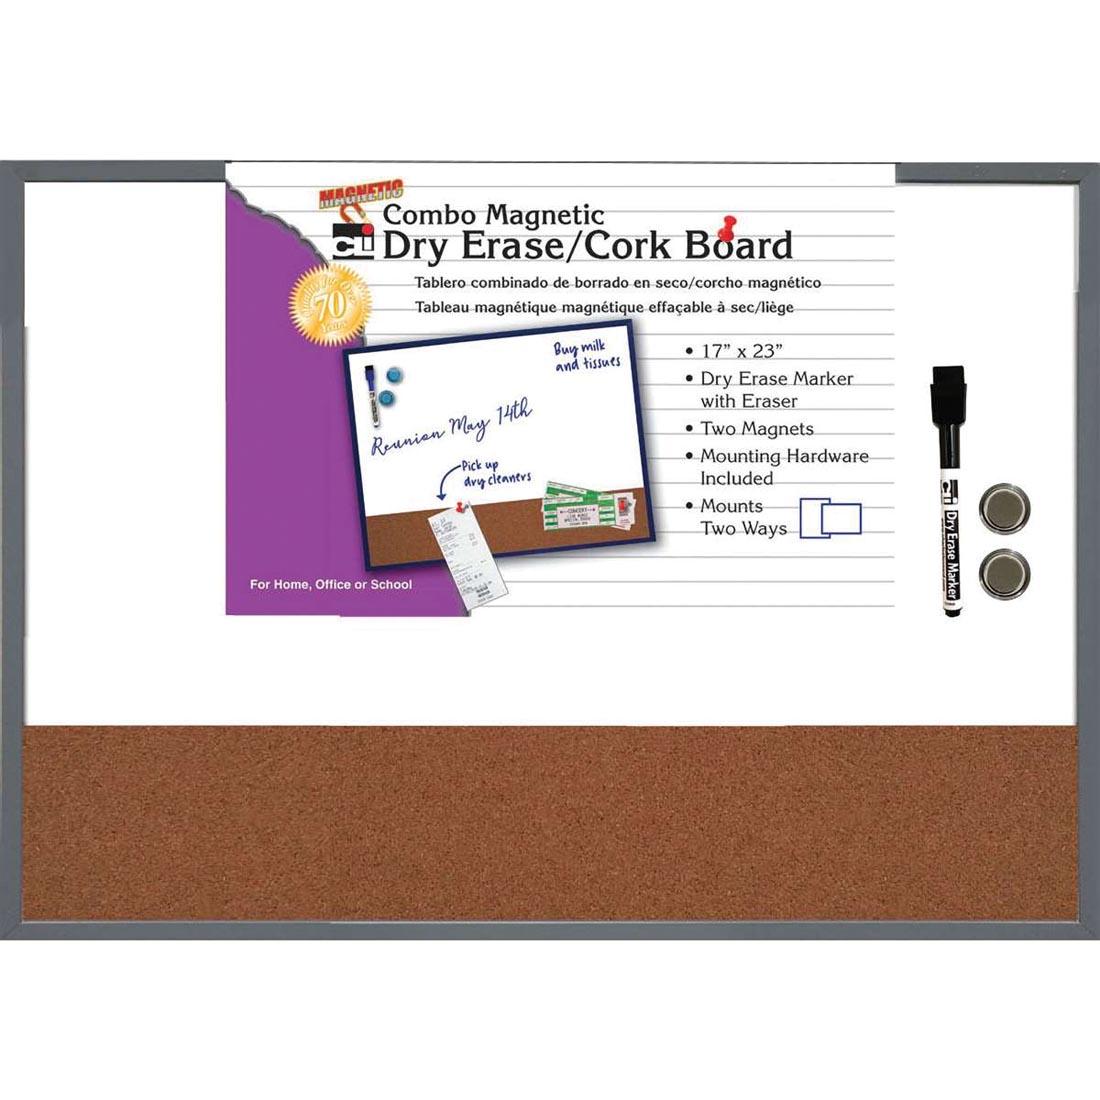 Combo Magnetic Dry Erase/Cork Board With Gray Border By Charles Leonard